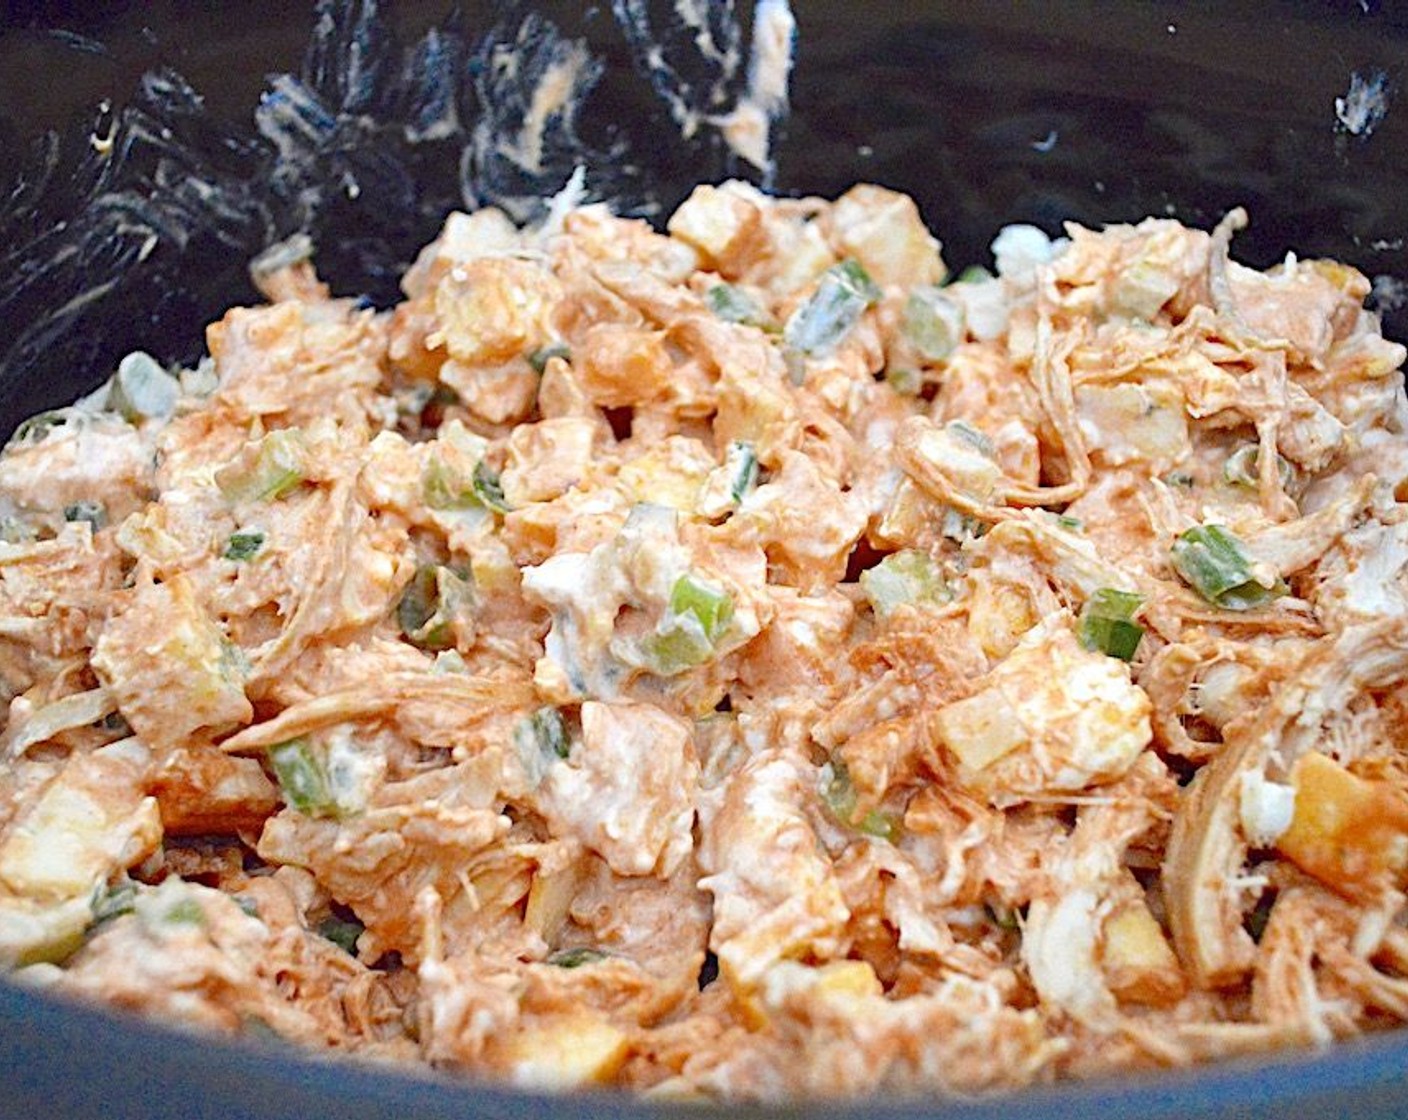 step 1 Combine Rotisserie Chicken (3 cups), Frank's® RedHot® Buffalo Sauce (1 cup), Pepper Jack Cheese (10 slices), Cream Cheese (1 cup), Scallions (4 stalks), Celery (2 stalks), Salt (1 pinch), and McCormick® Garlic Powder (1/2 tsp) in a crock pot and give it a stir.